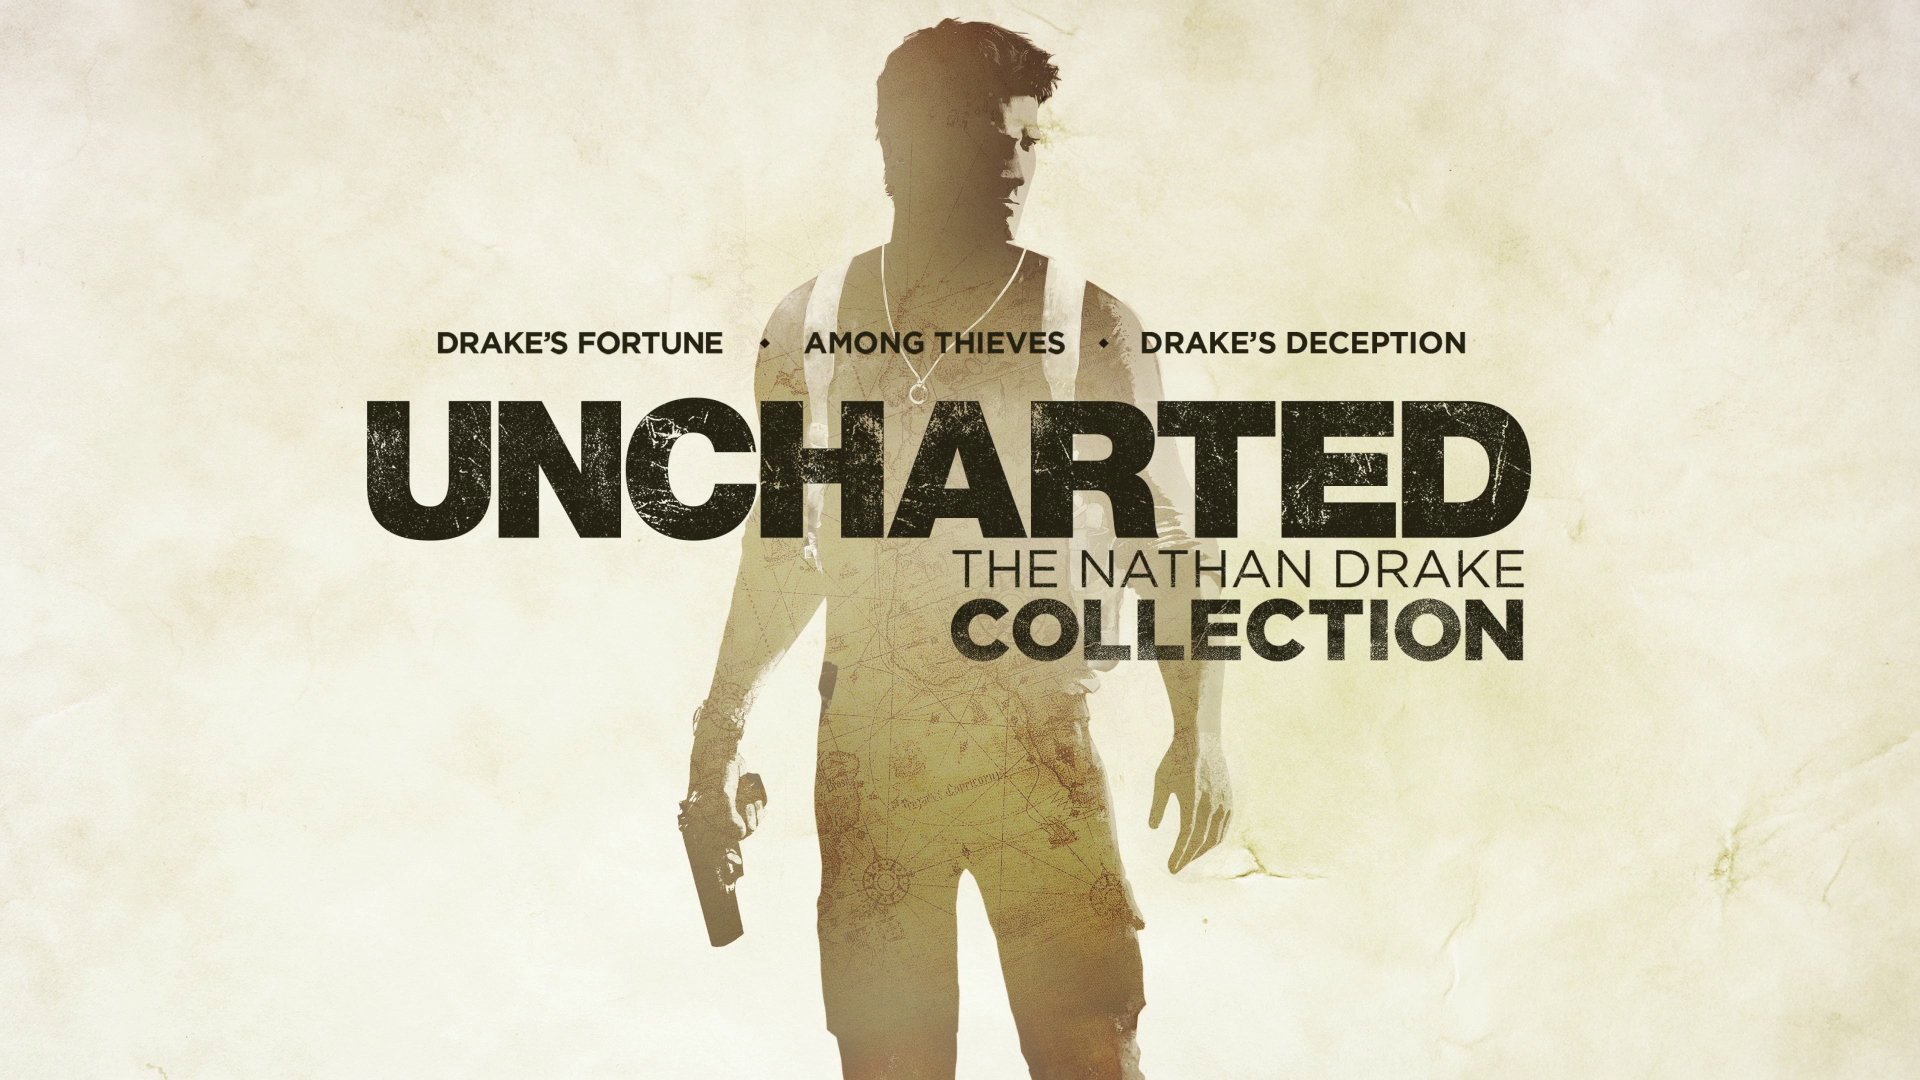 Uncharted: The Nathan Drake Collection key art